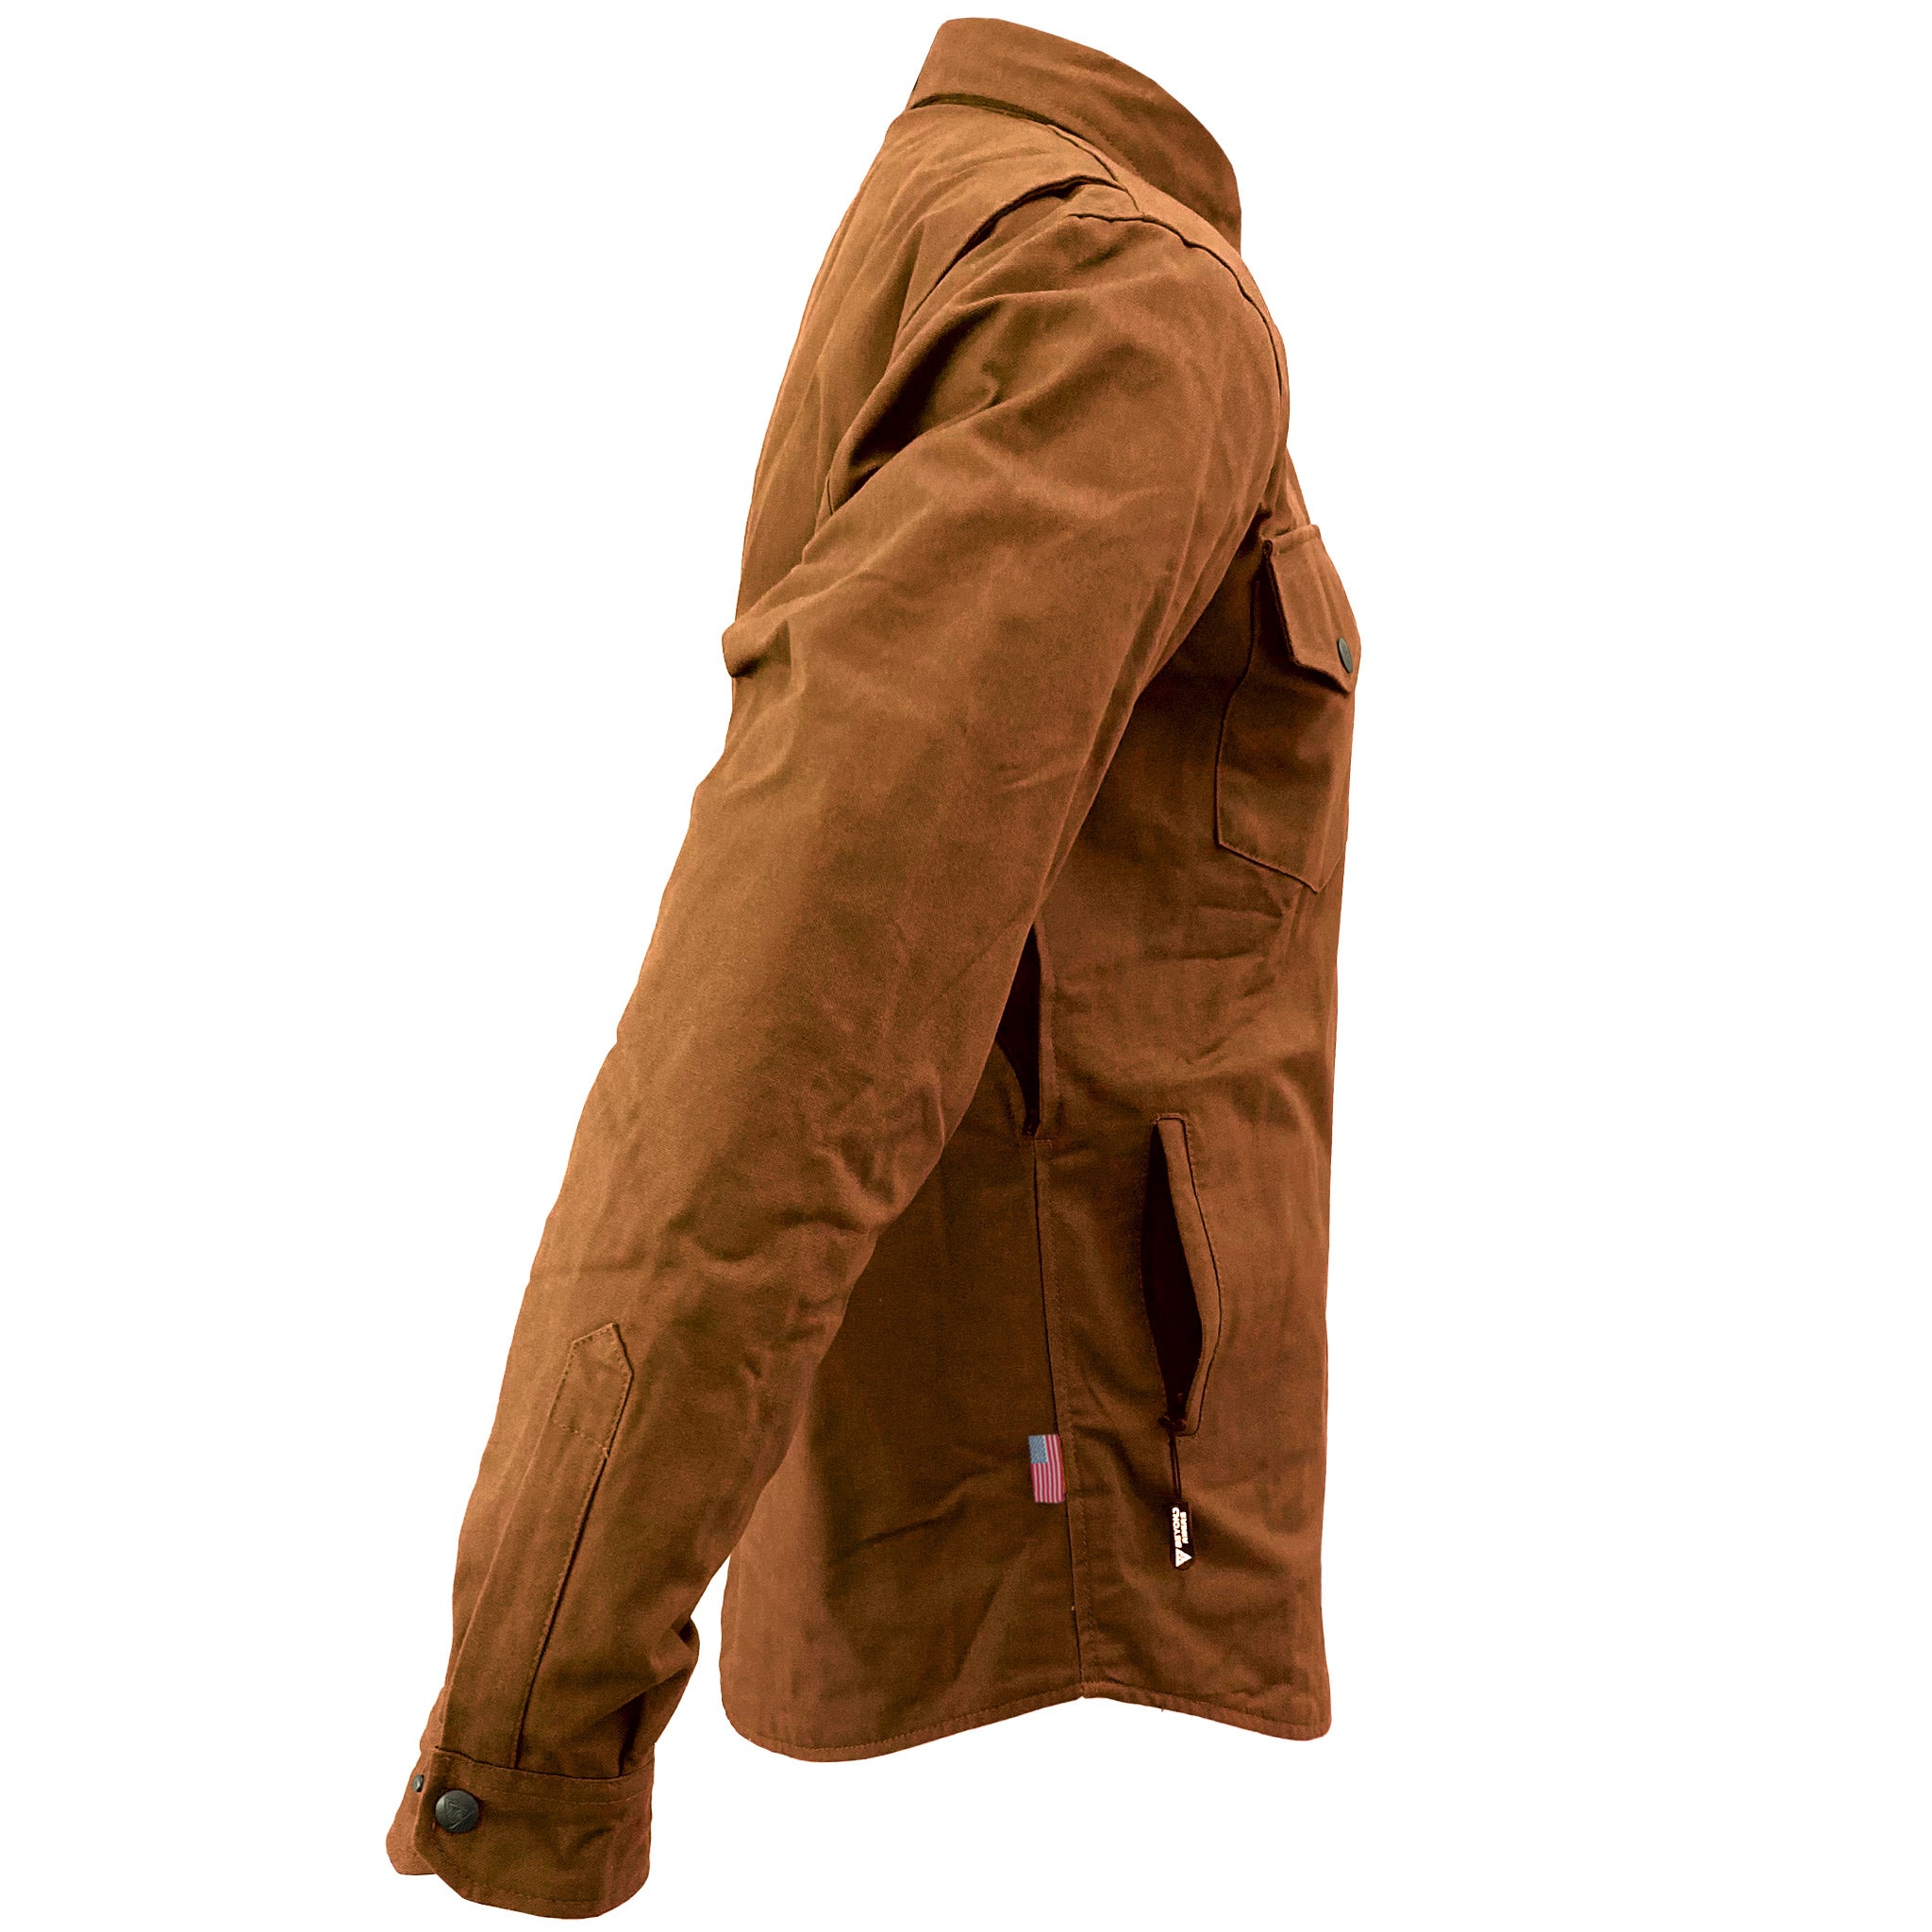 Protective Canvas Jacket for Men - Light Brown with Pads